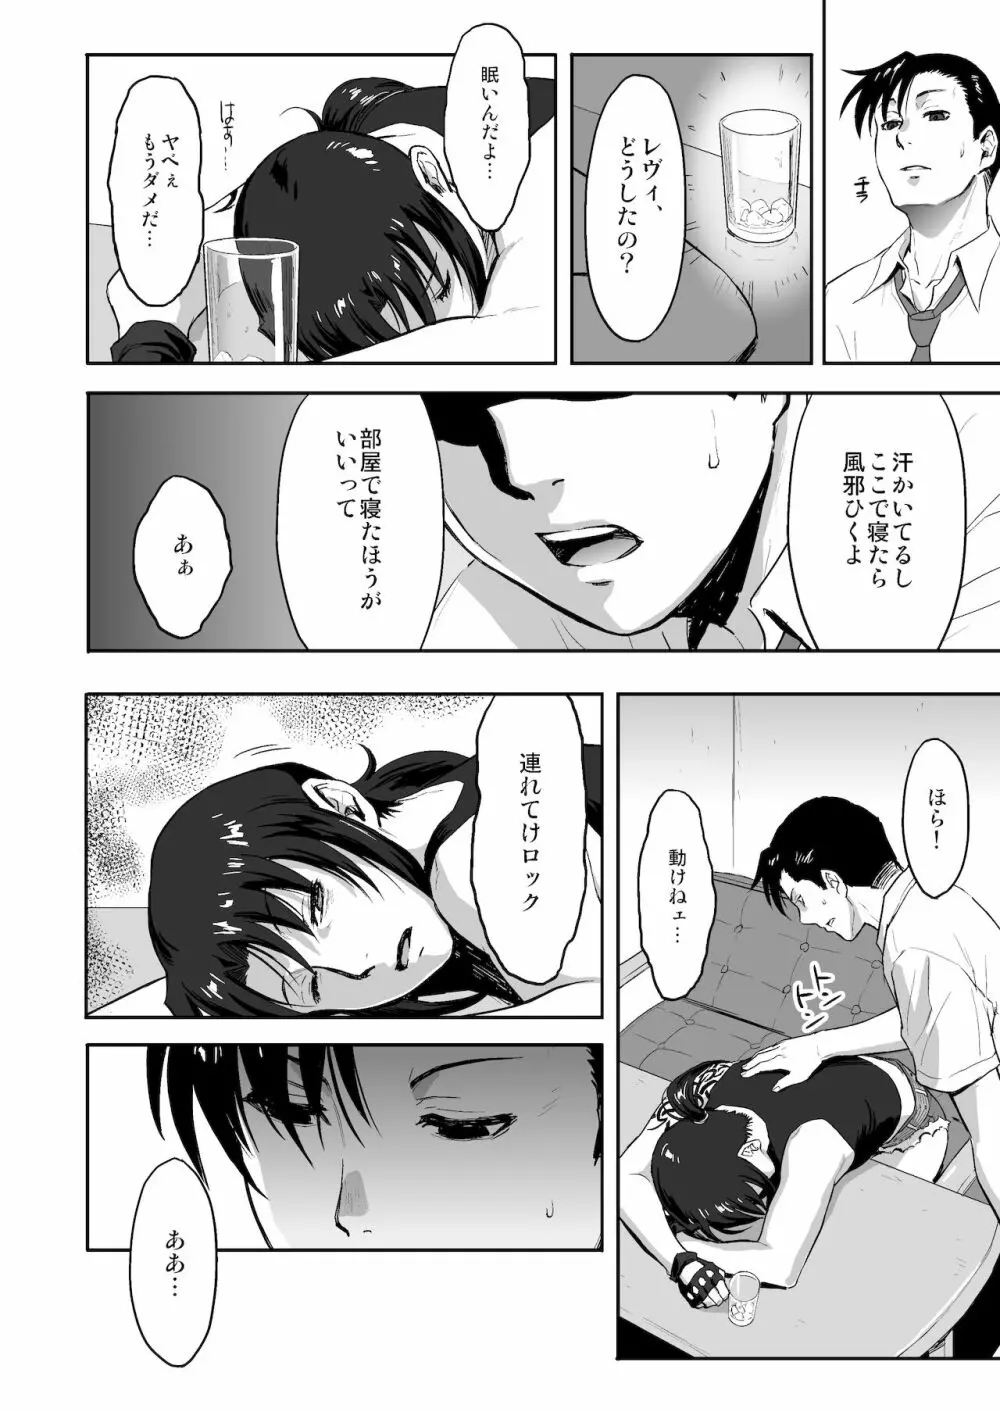 SLEEPING Revy - page5